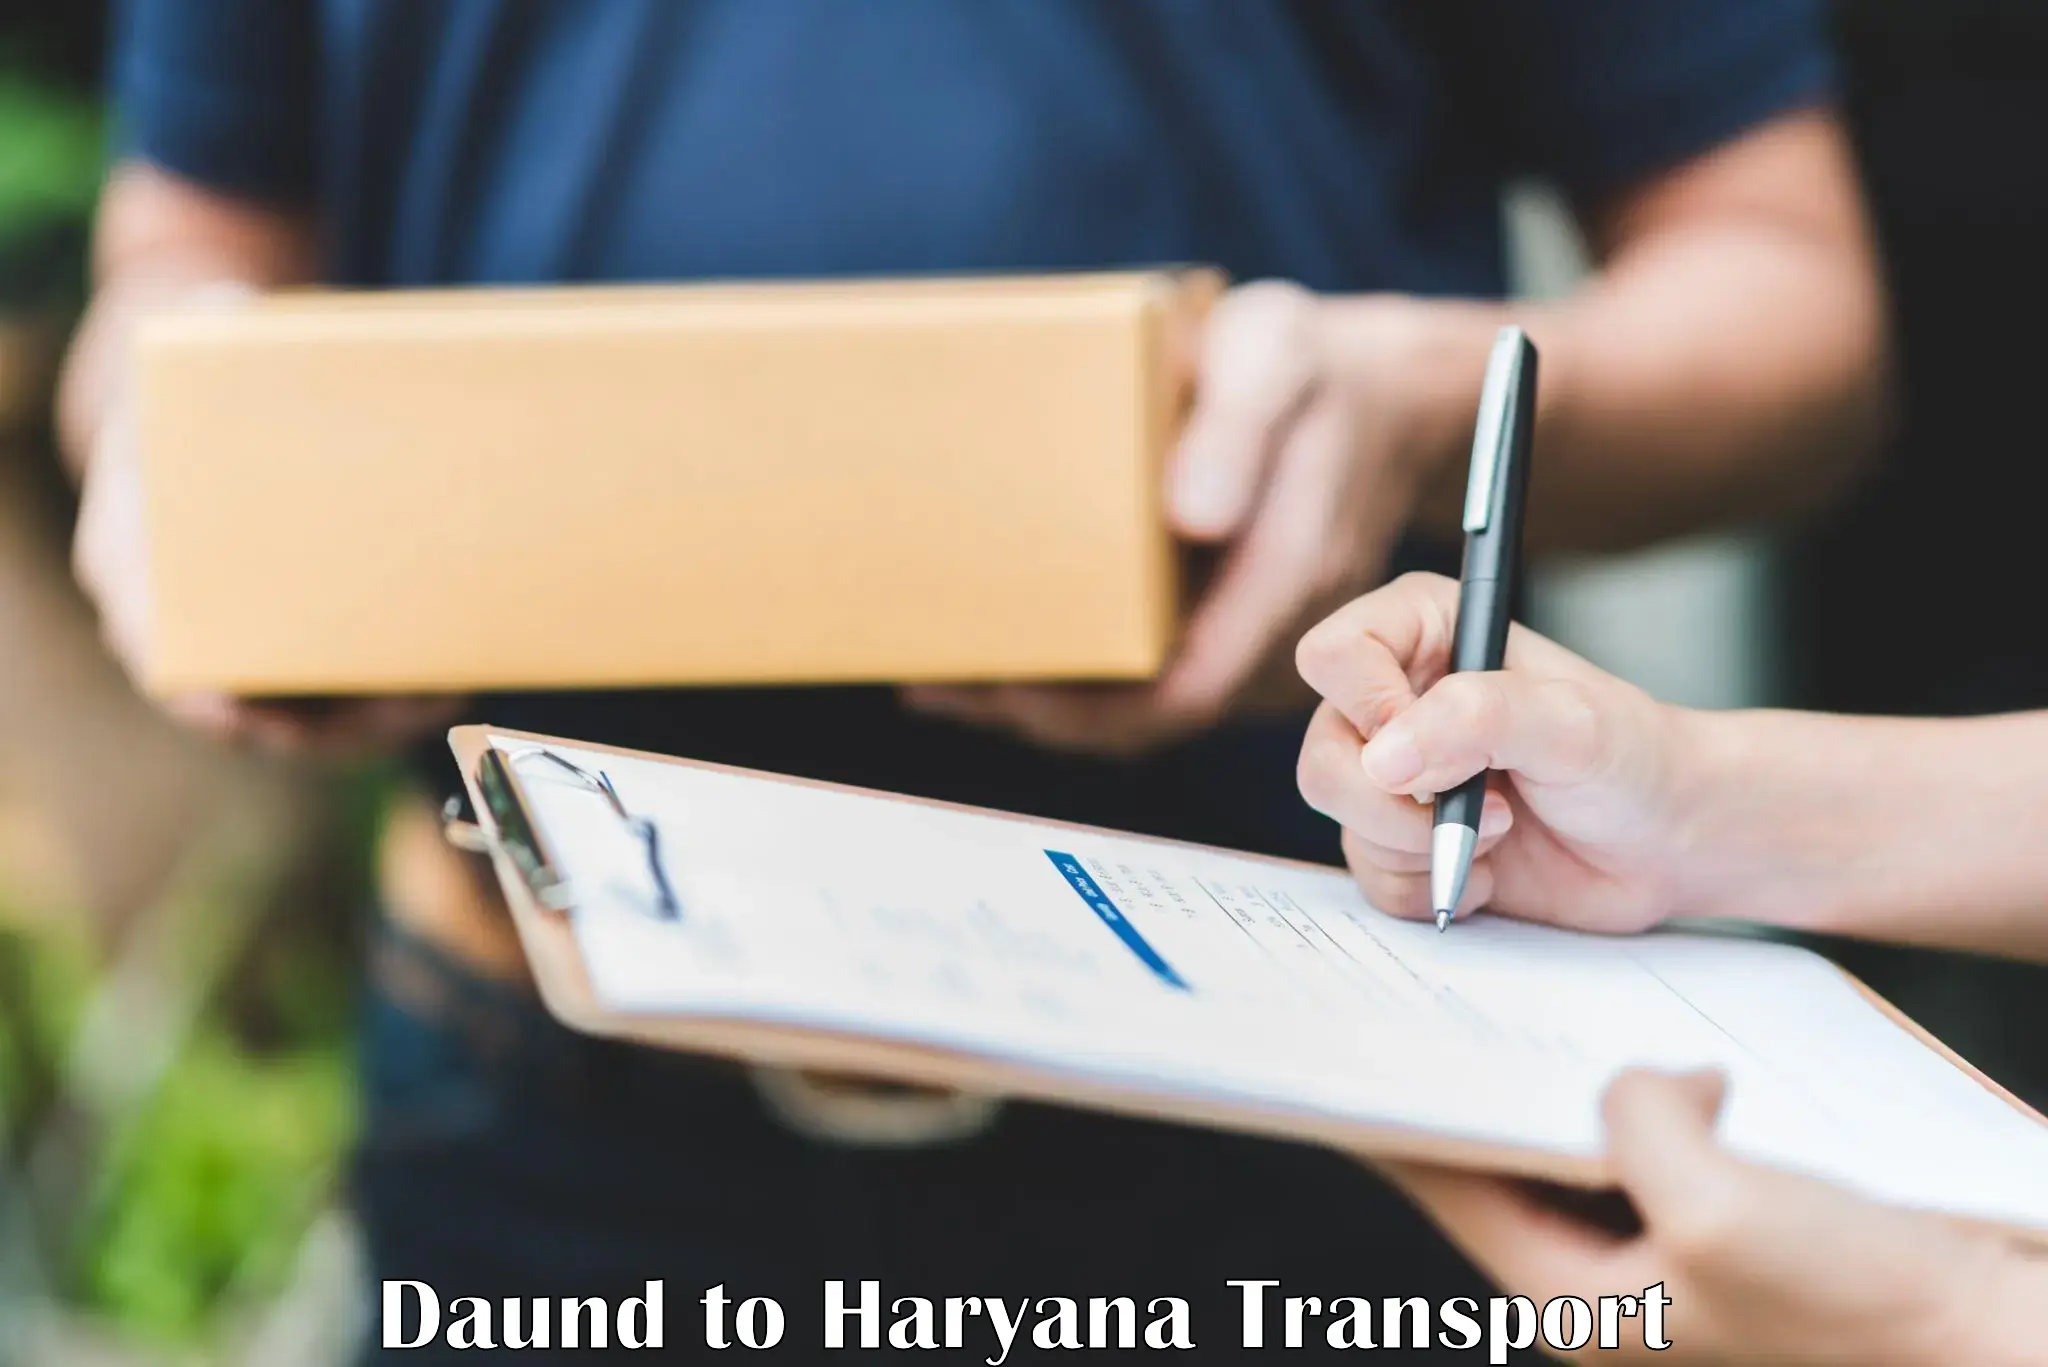 Container transport service Daund to Chaudhary Charan Singh Haryana Agricultural University Hisar